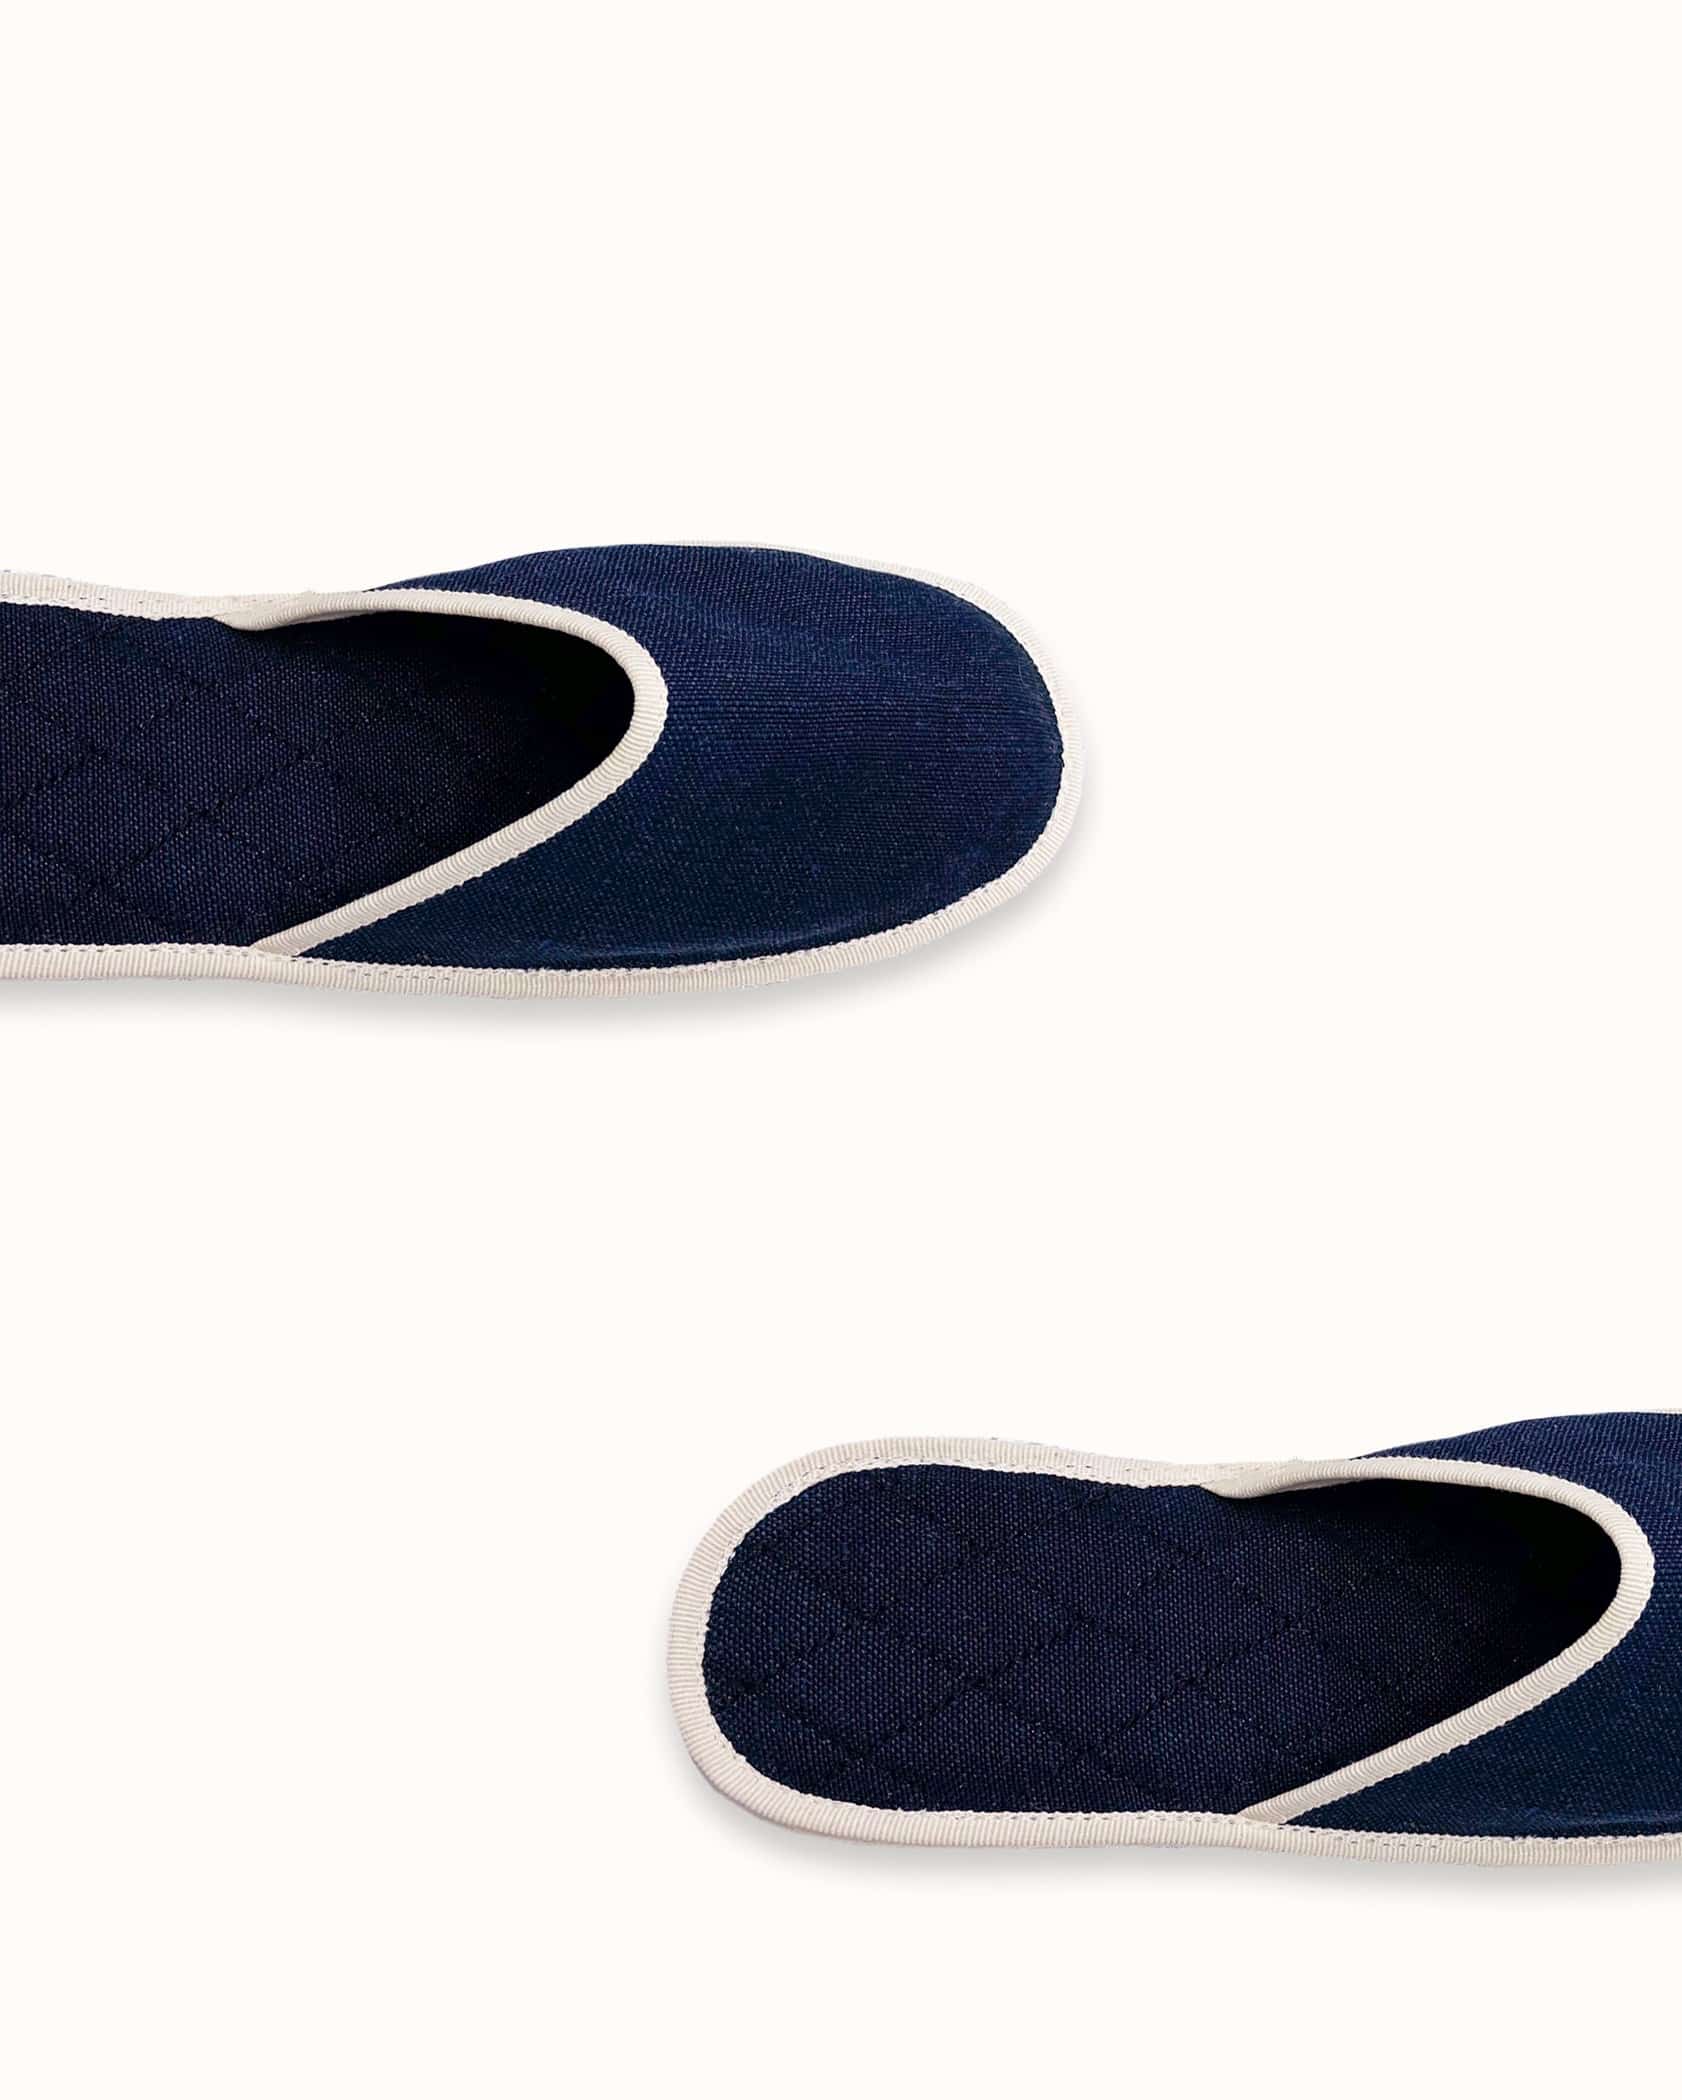 French slippers for men, women and kids. Le Spleen "Heure Exquise", navy blue and white. A slip-on like hotel slippers with a quilted padding and an outstanding craftsmanship manufacturing. Made in France.